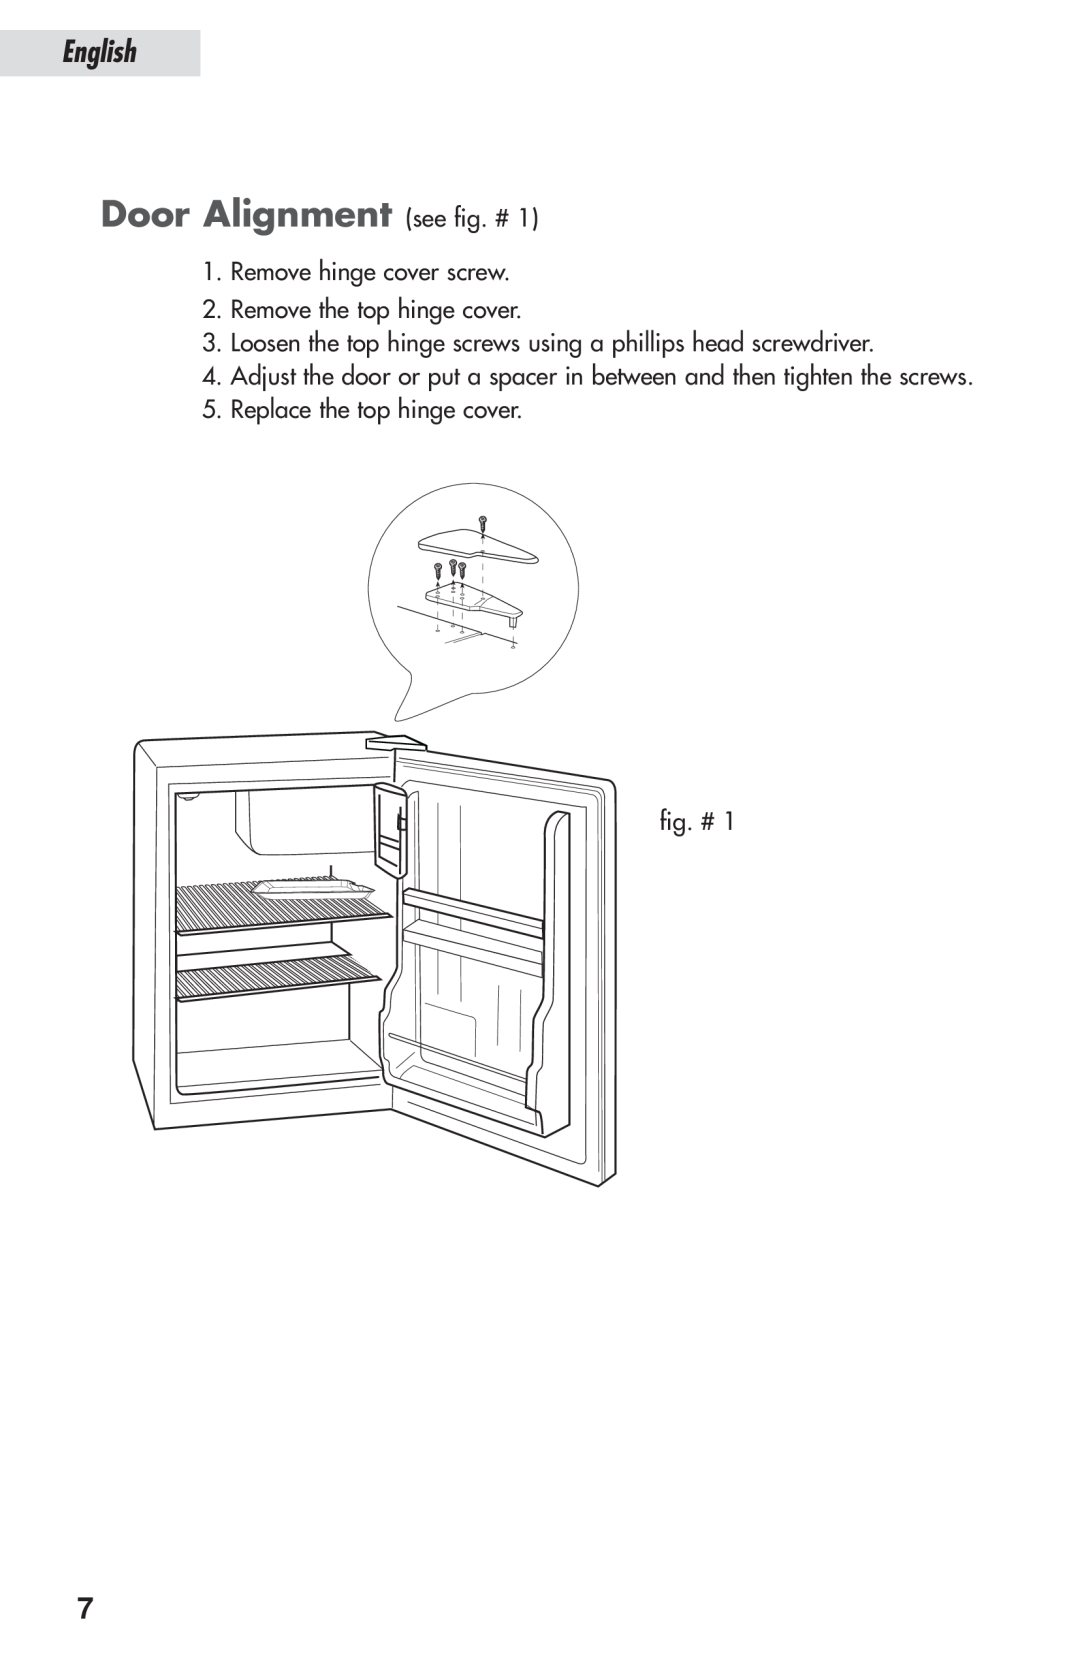 Haier HSP03WNAWW user manual Door Alignment see fig. #, English, Remove hinge cover screw, Remove the top hinge cover 